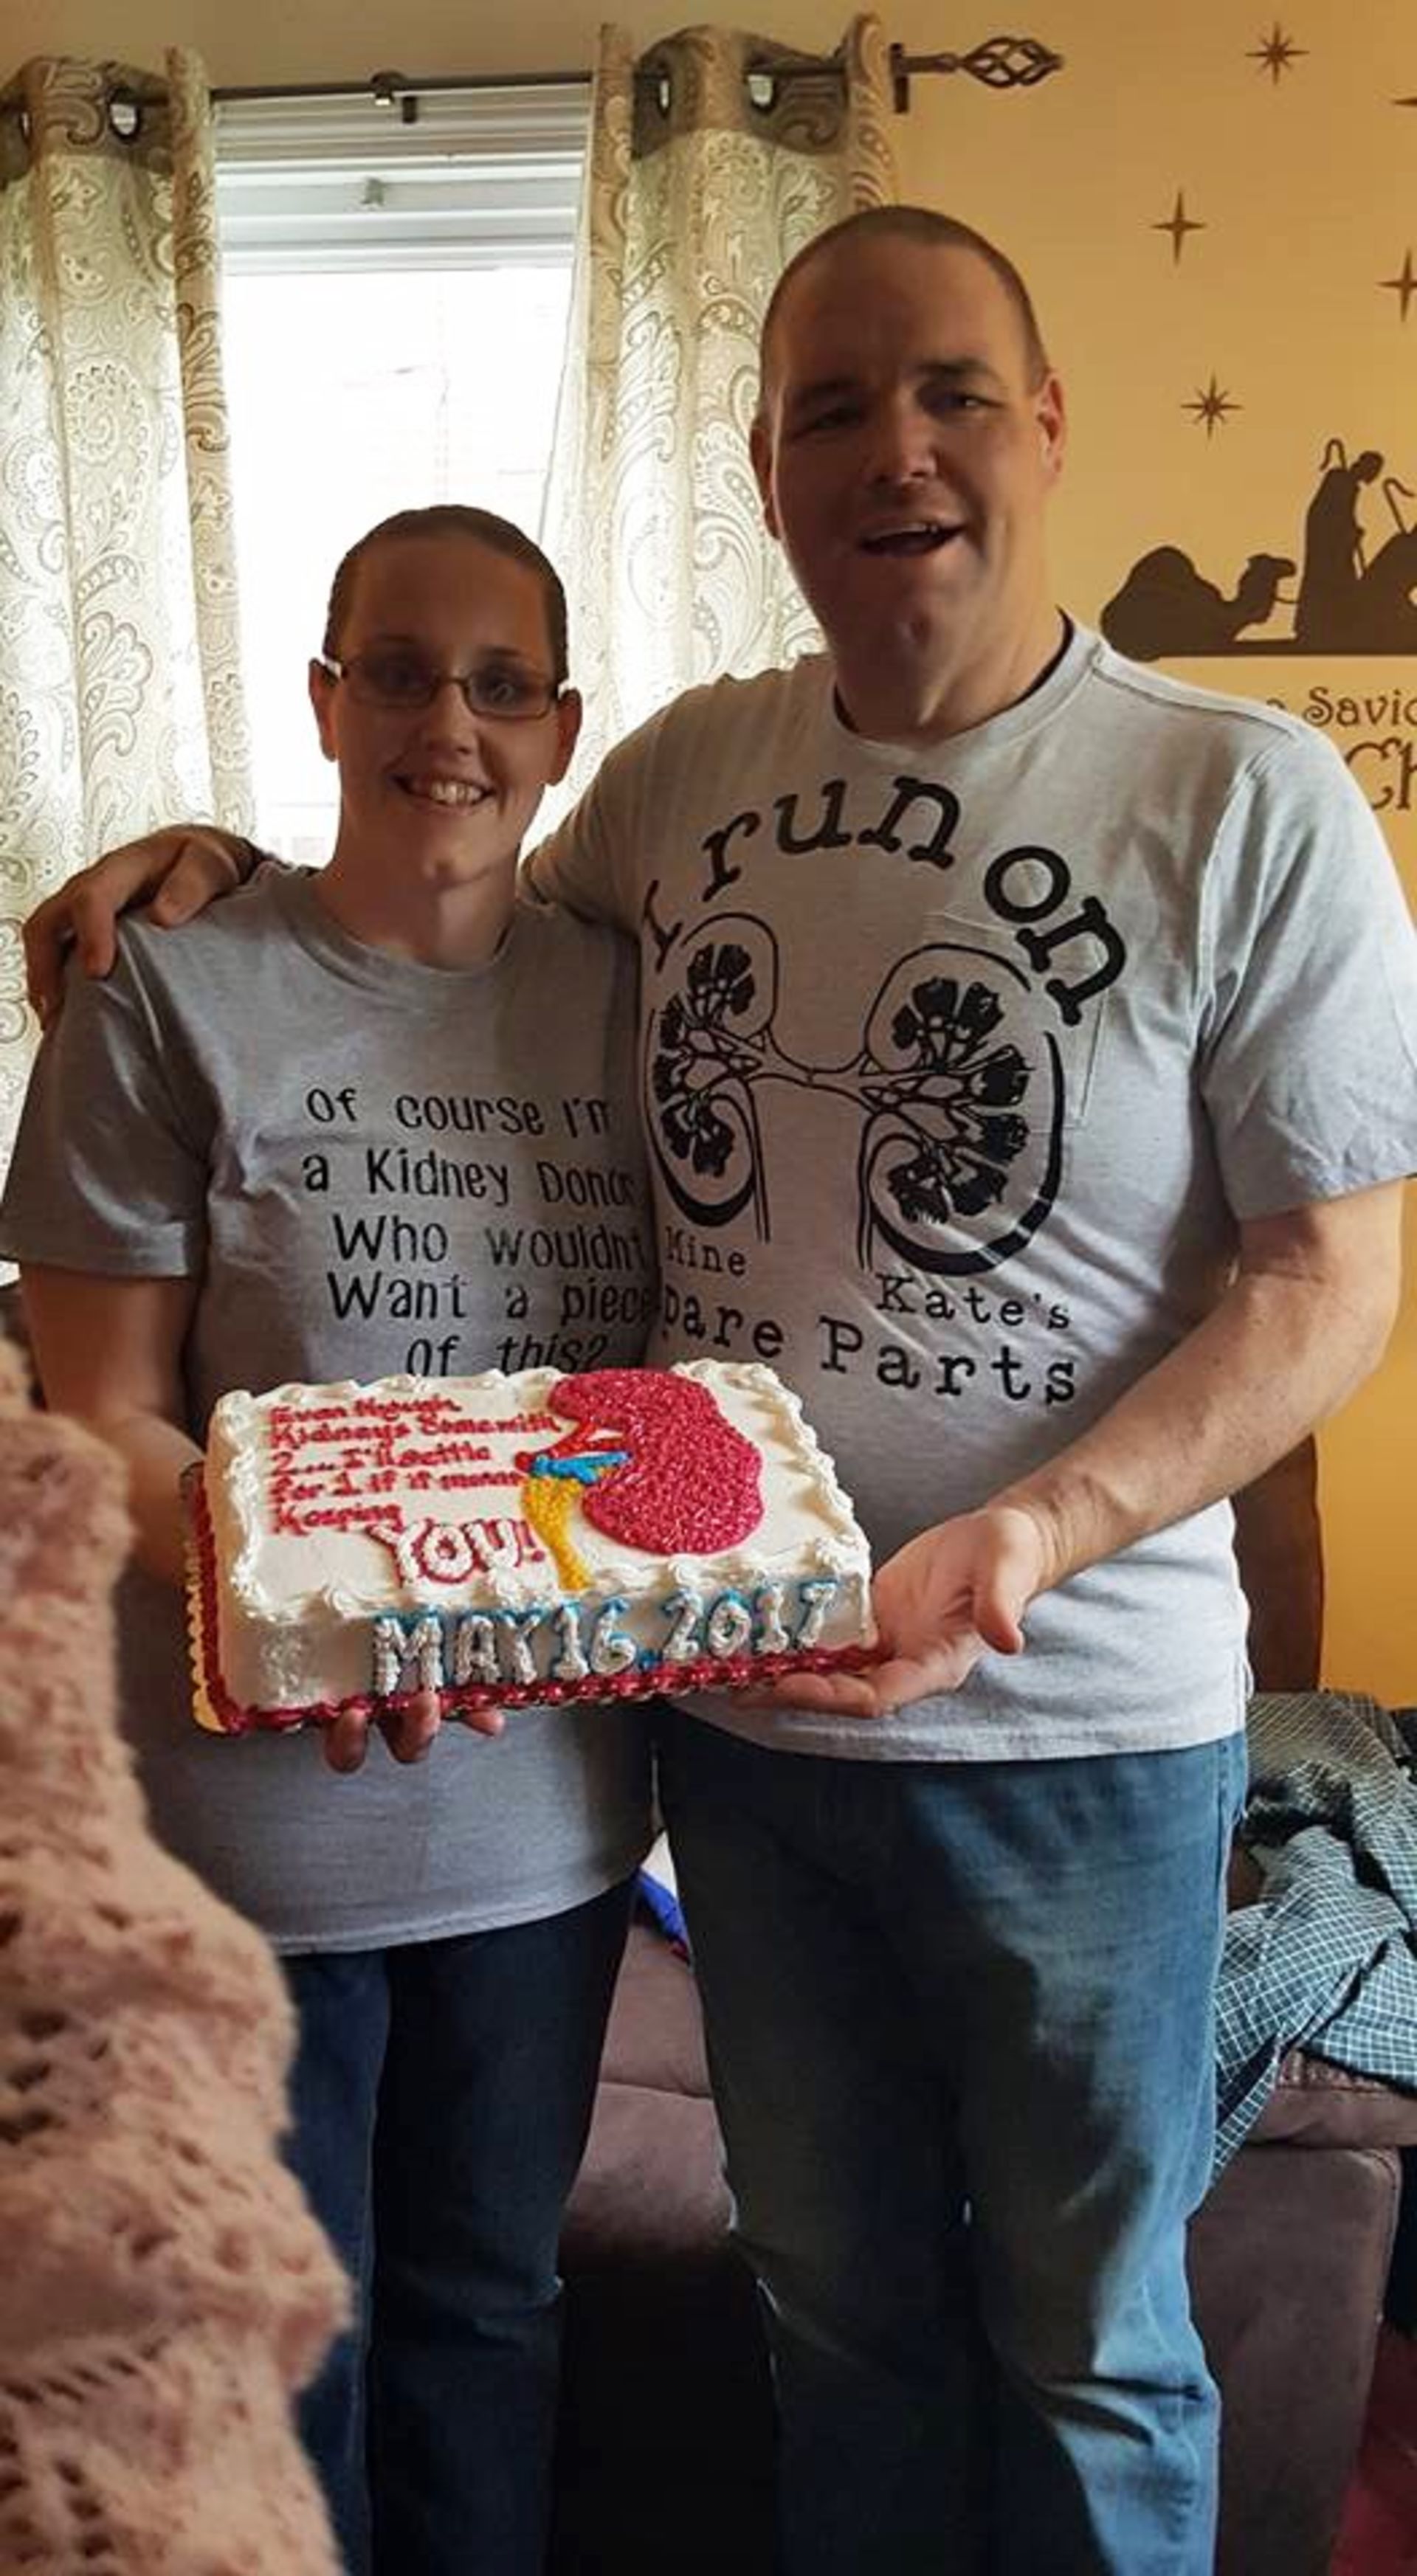 Brother and sister, with a special cake in honor of the kidney donation.